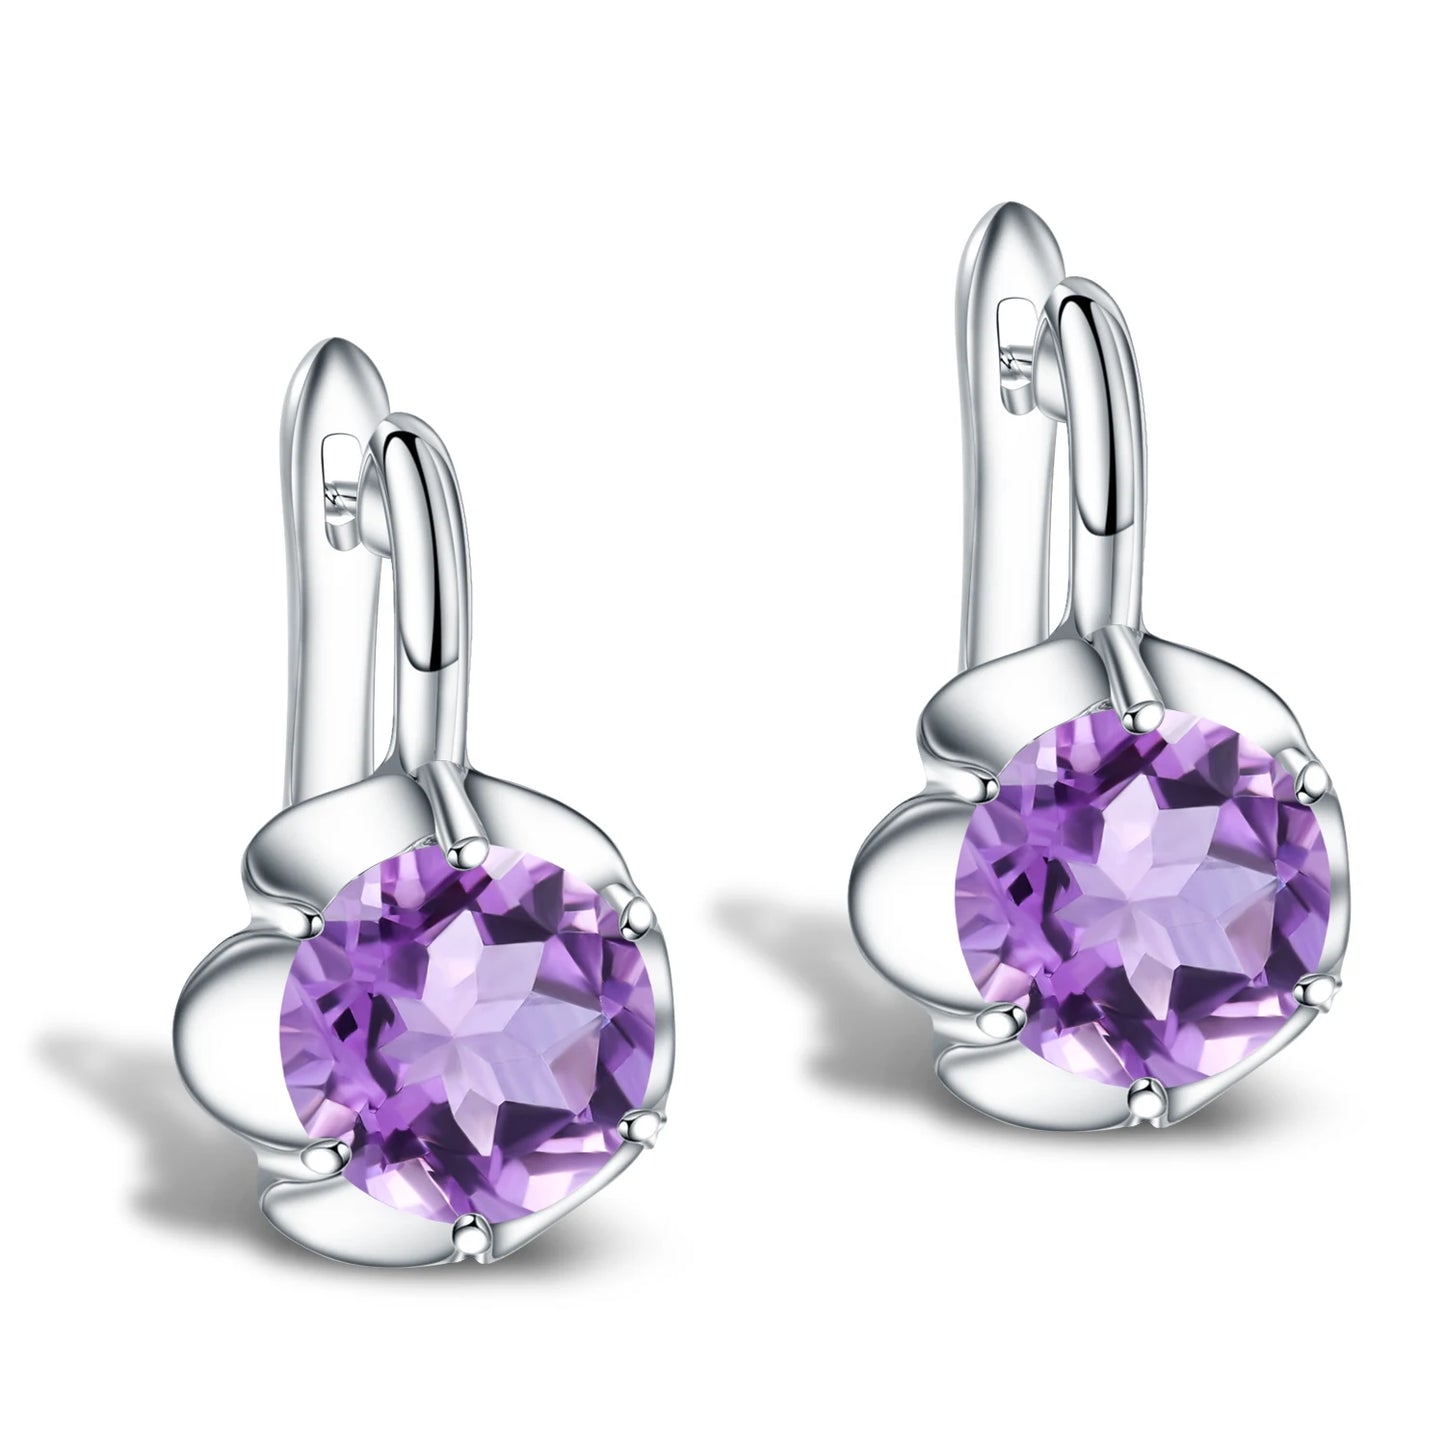 GEM'S BALLET Pure 925 Sterling Silver Fine Jewelry Oval 5.47Ct Natural Green Amethyst Birthstone Stud Earrings For Women Amethyst 925 Sterling Silver CHINA